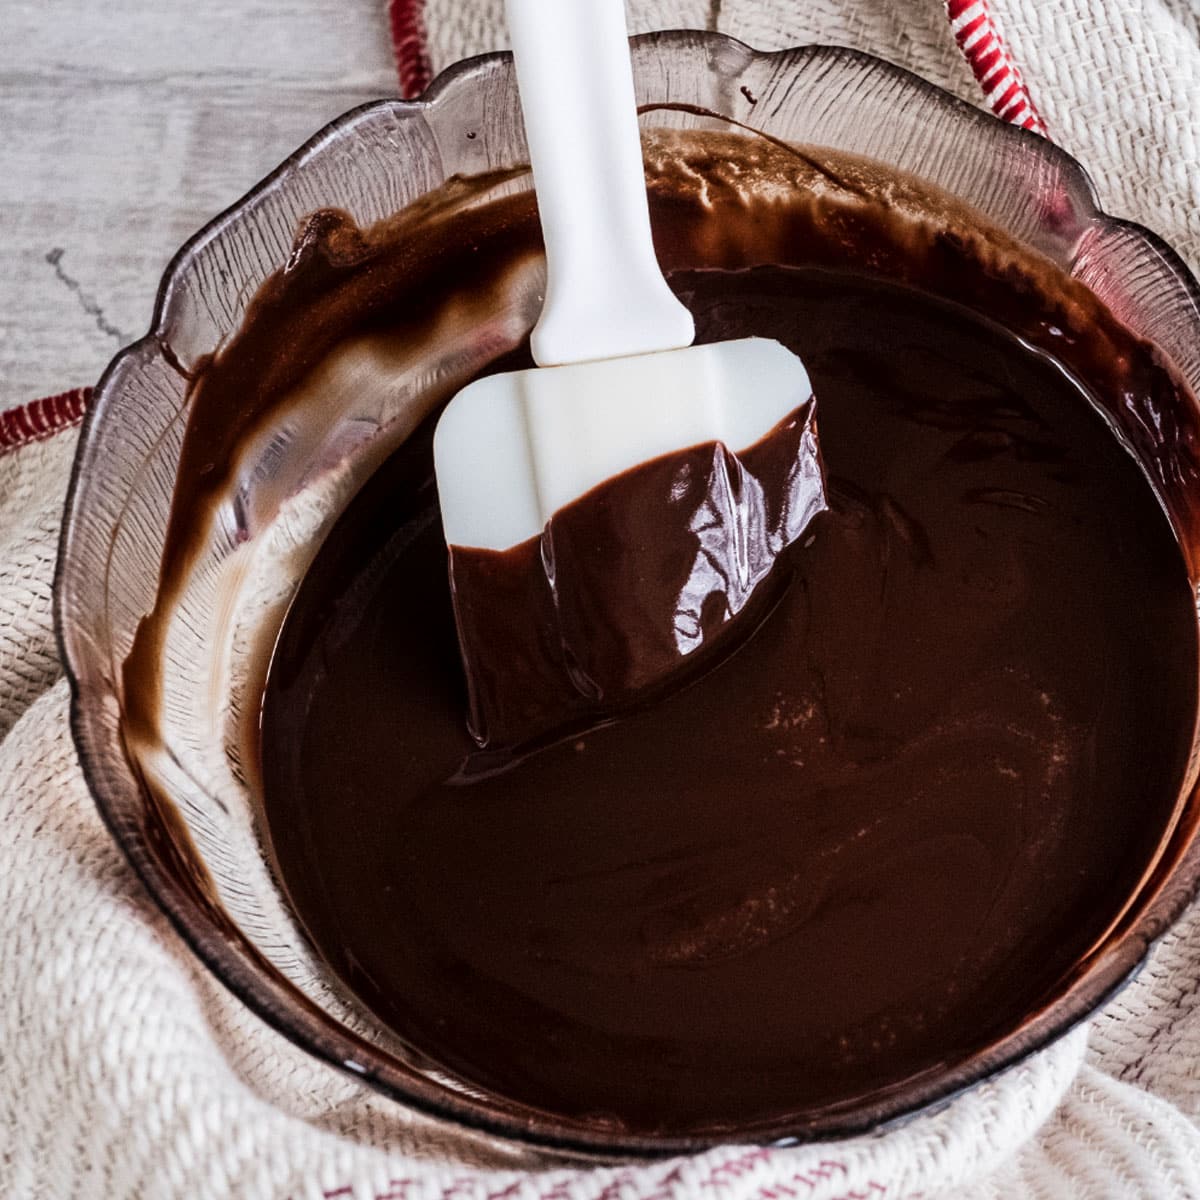 Discover the secrets to salvaging brownies with too much water in the mix. Follow our expert guidance to transform your watery batter into a delicious chocolate treat.